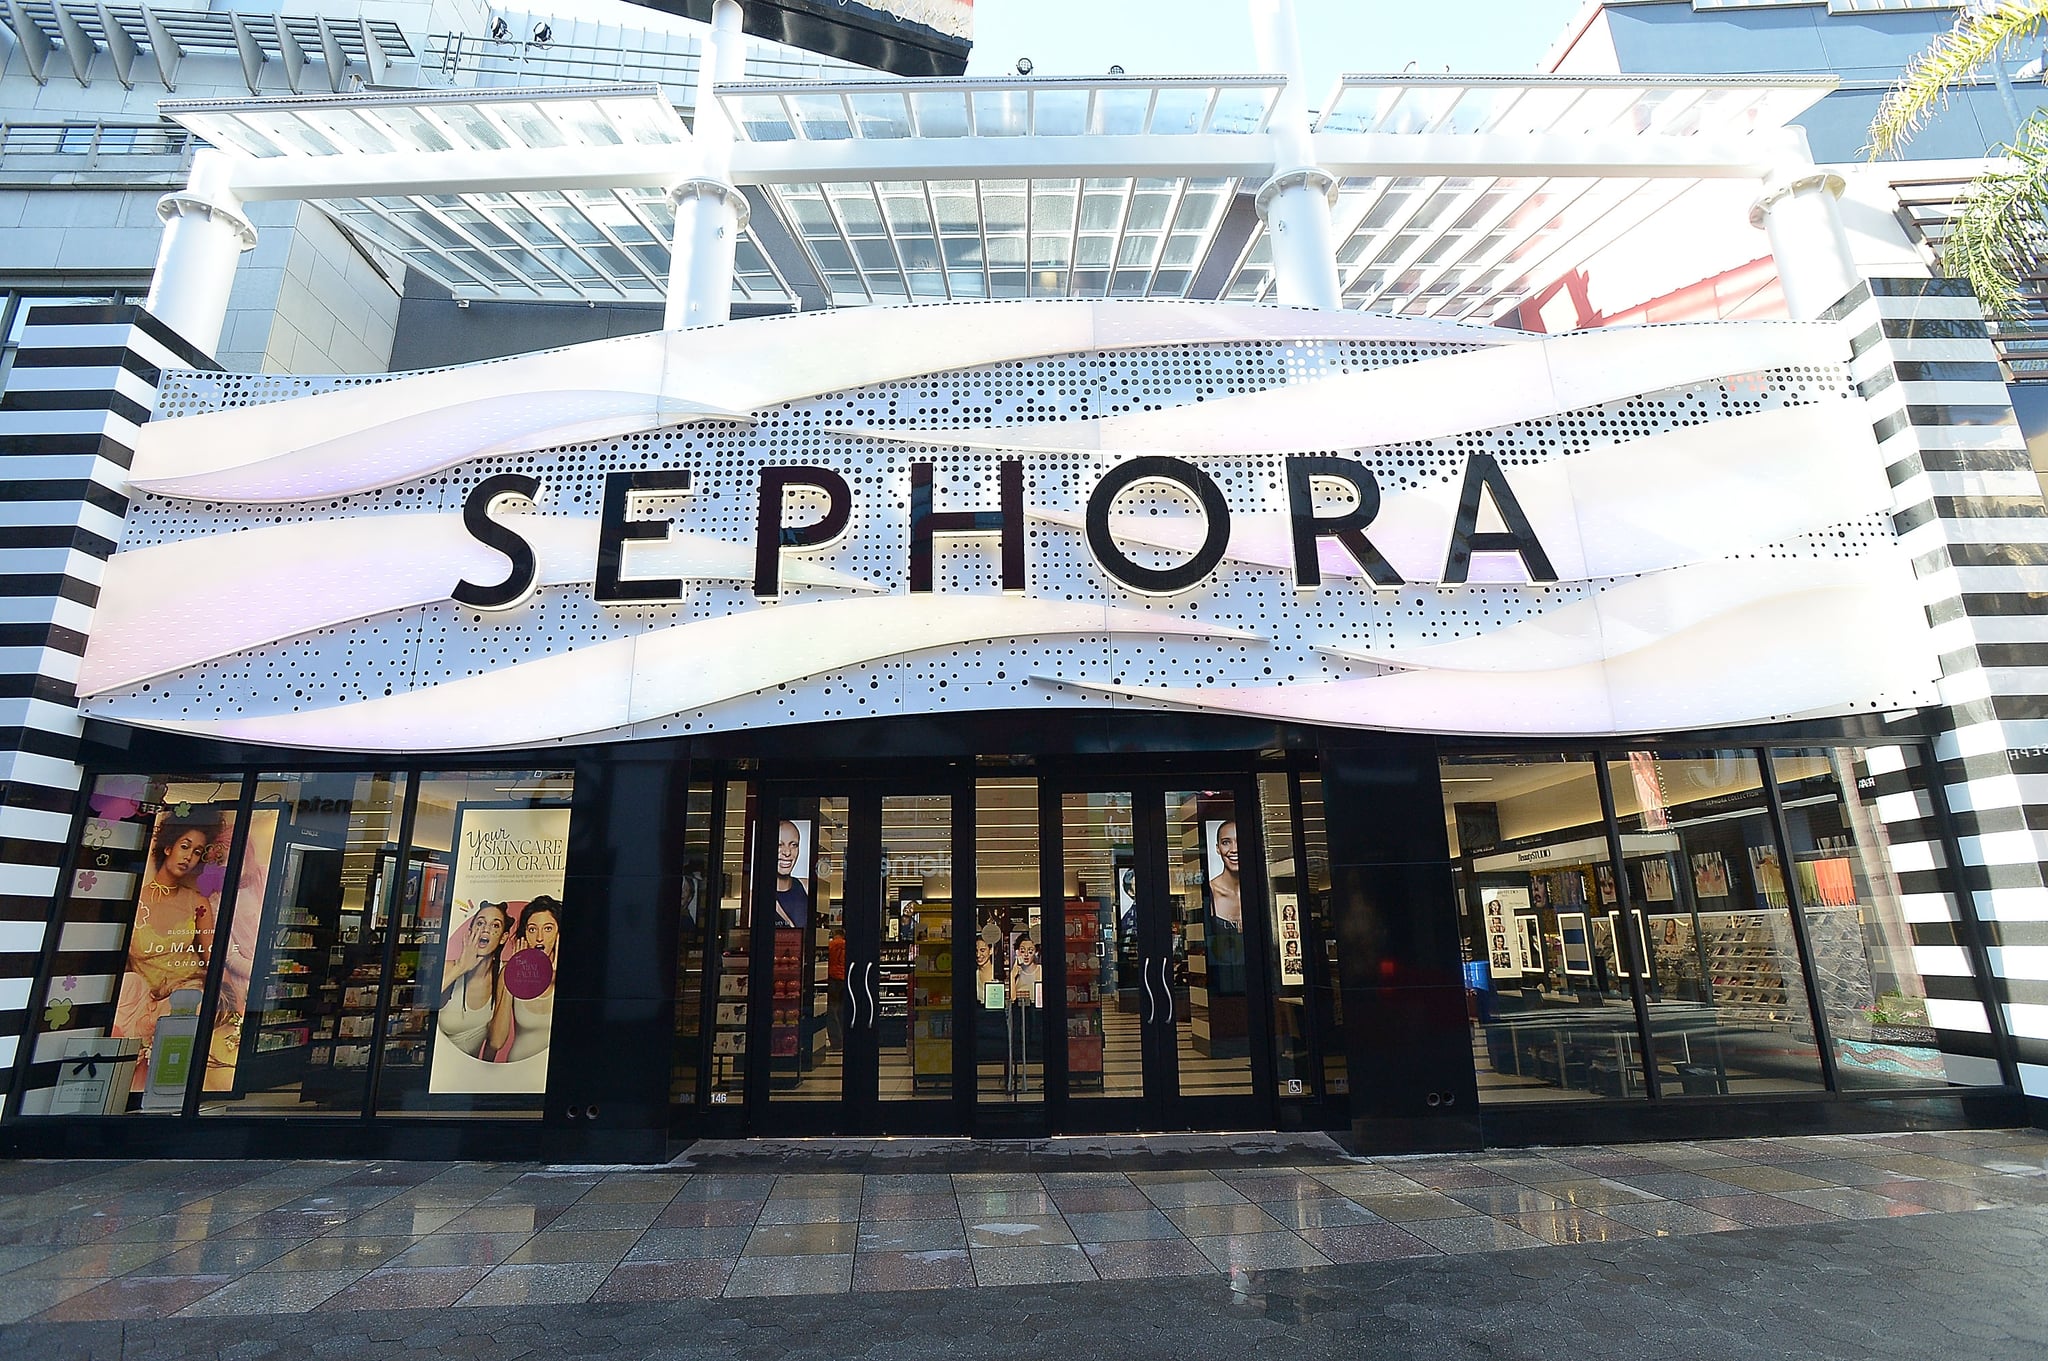 UNIVERSAL CITY, CA - APRIL 19:  Atmosphere of the new Sephora Universal City Walk store on April 19, 2018 in Universal City, California.  (Photo by Charley Gallay/Getty Images for Sephora )